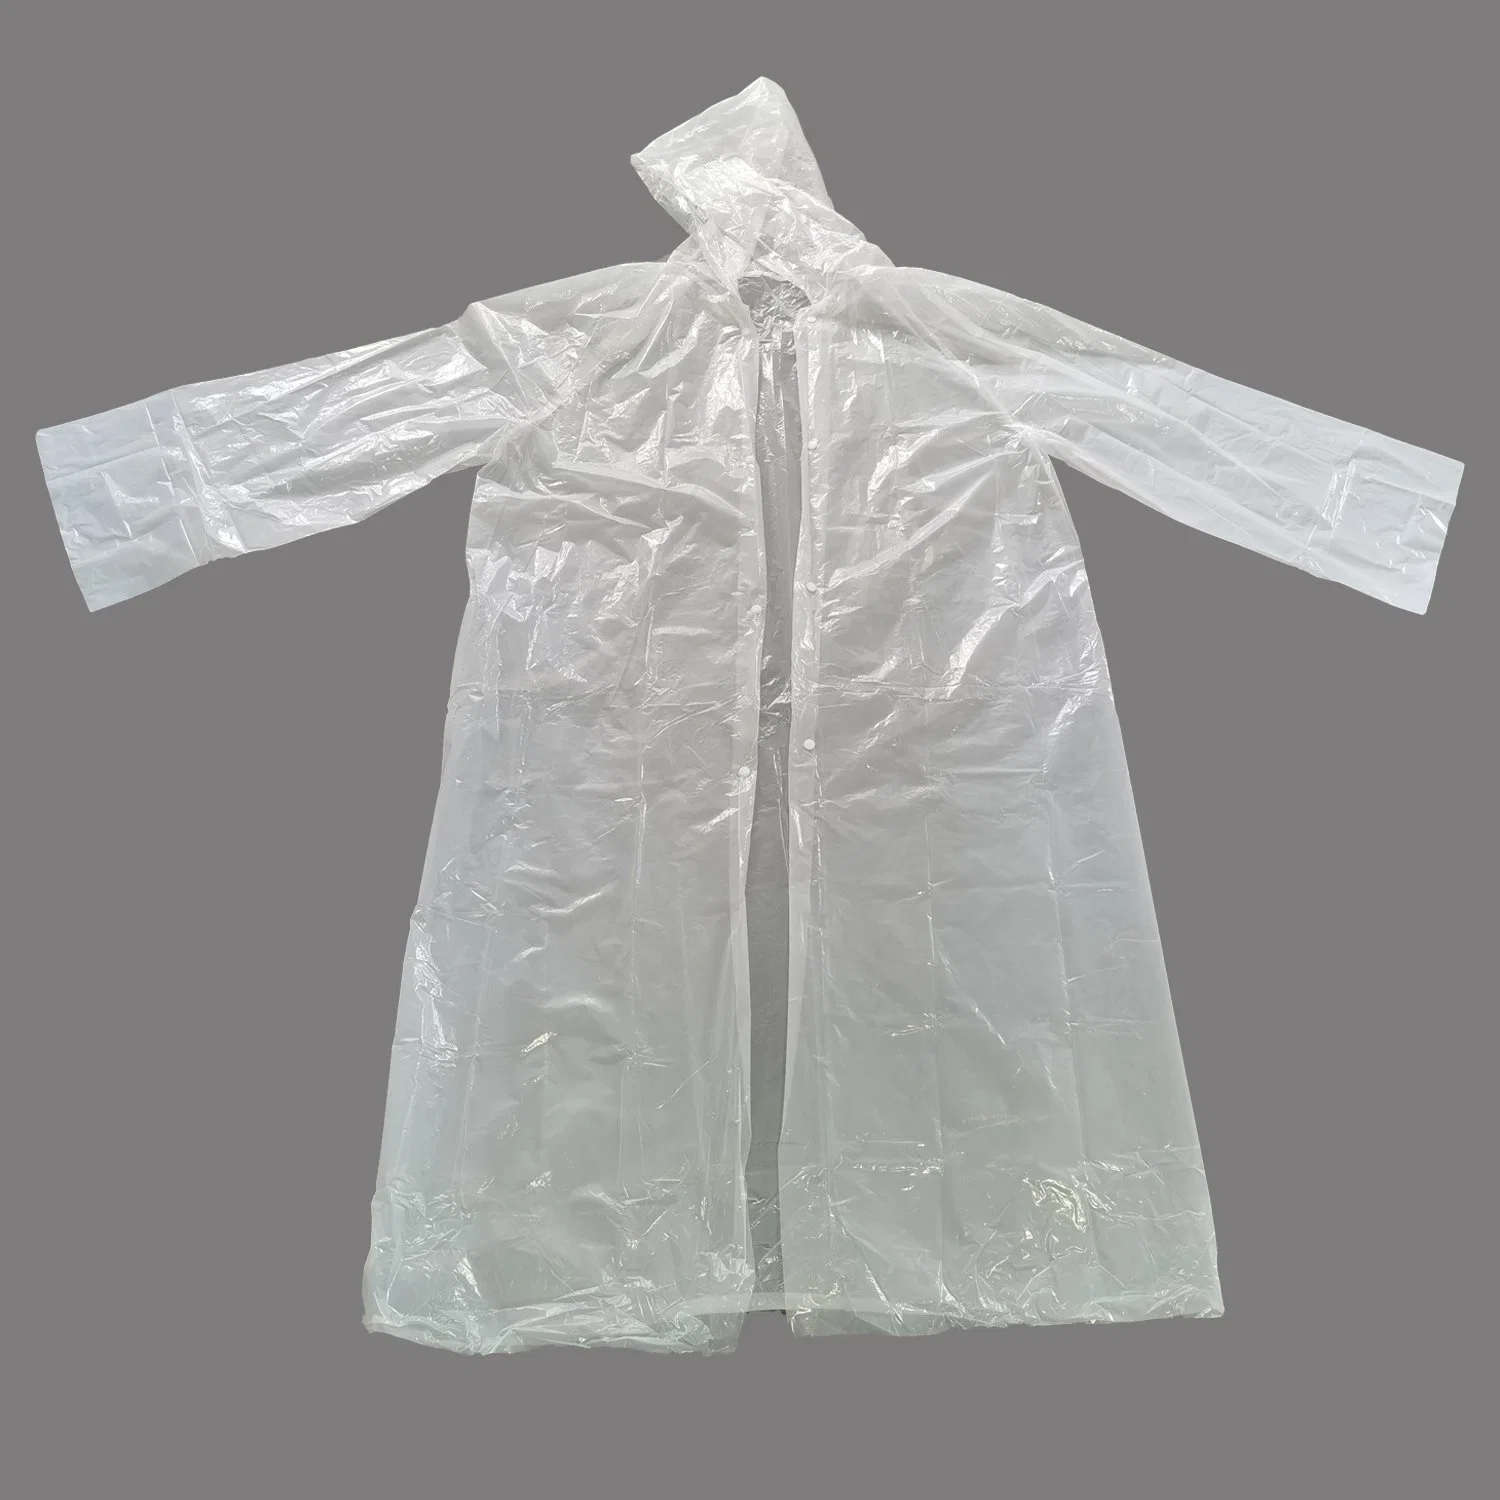 Polyster impermeable para Unisex Poncho impermeable impermeable con capucha